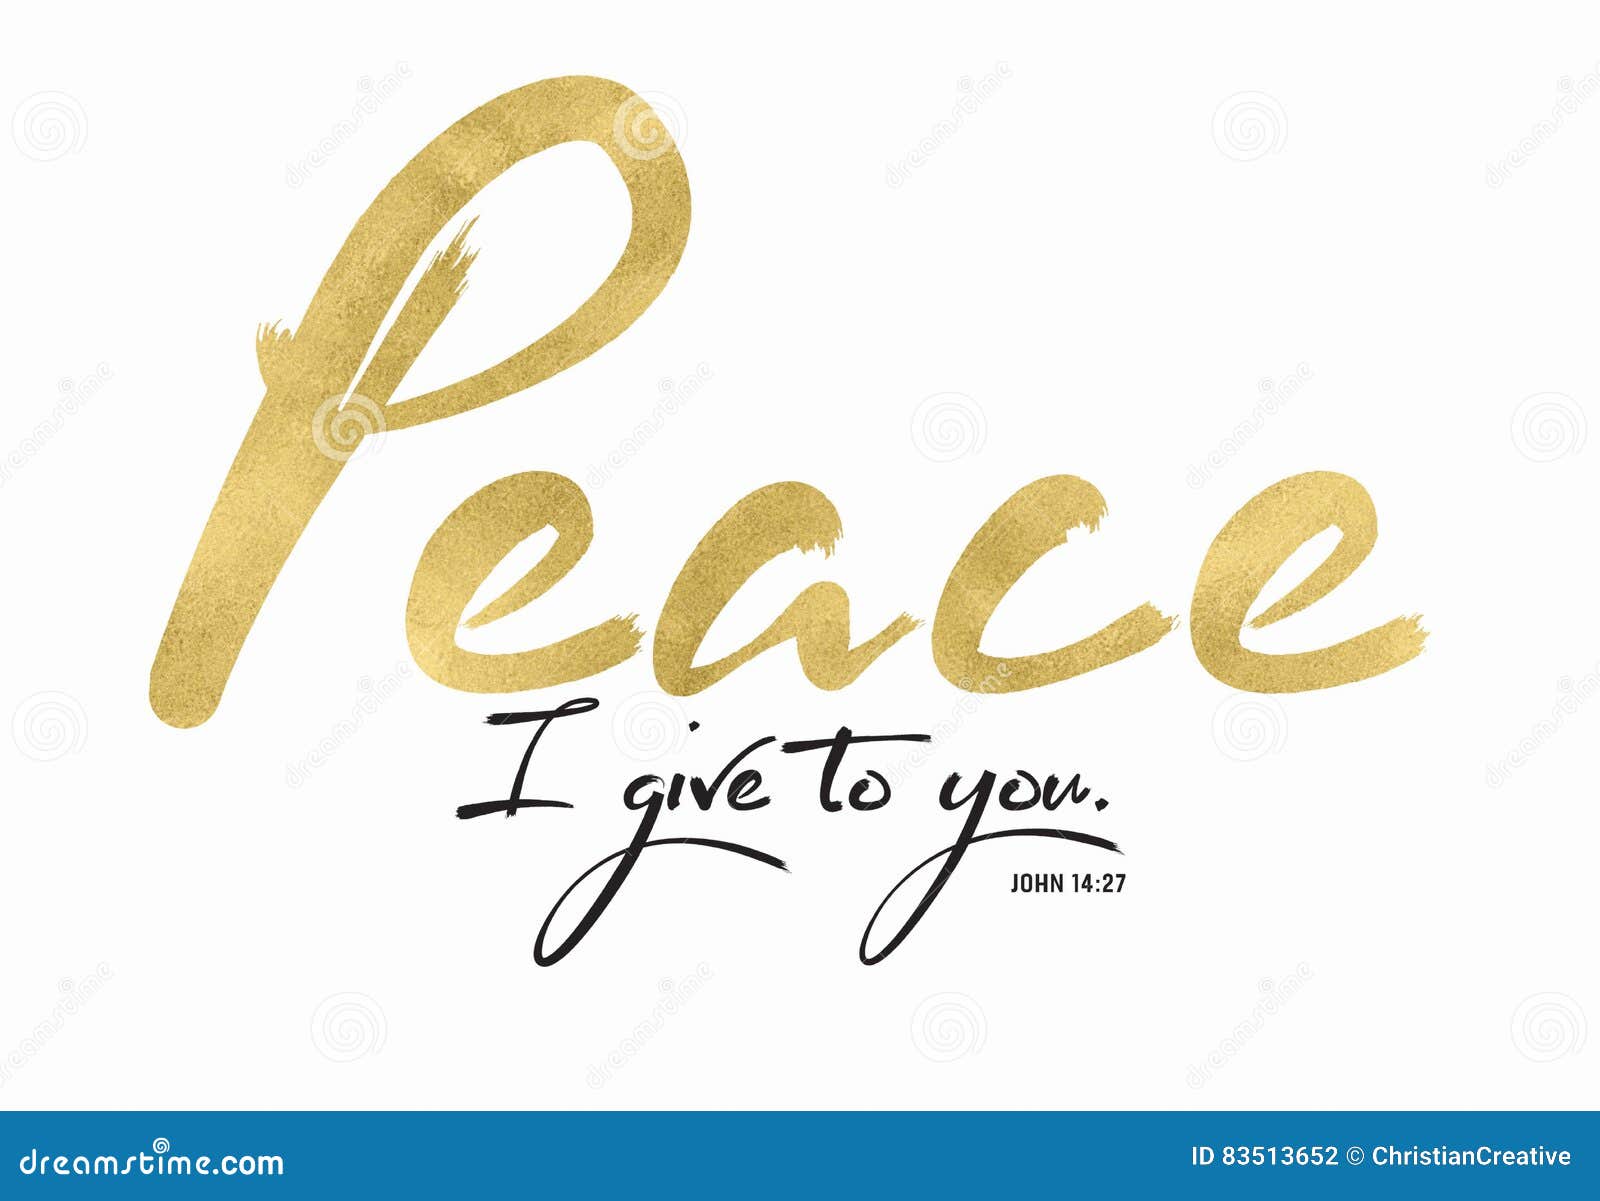 my peace i give to you